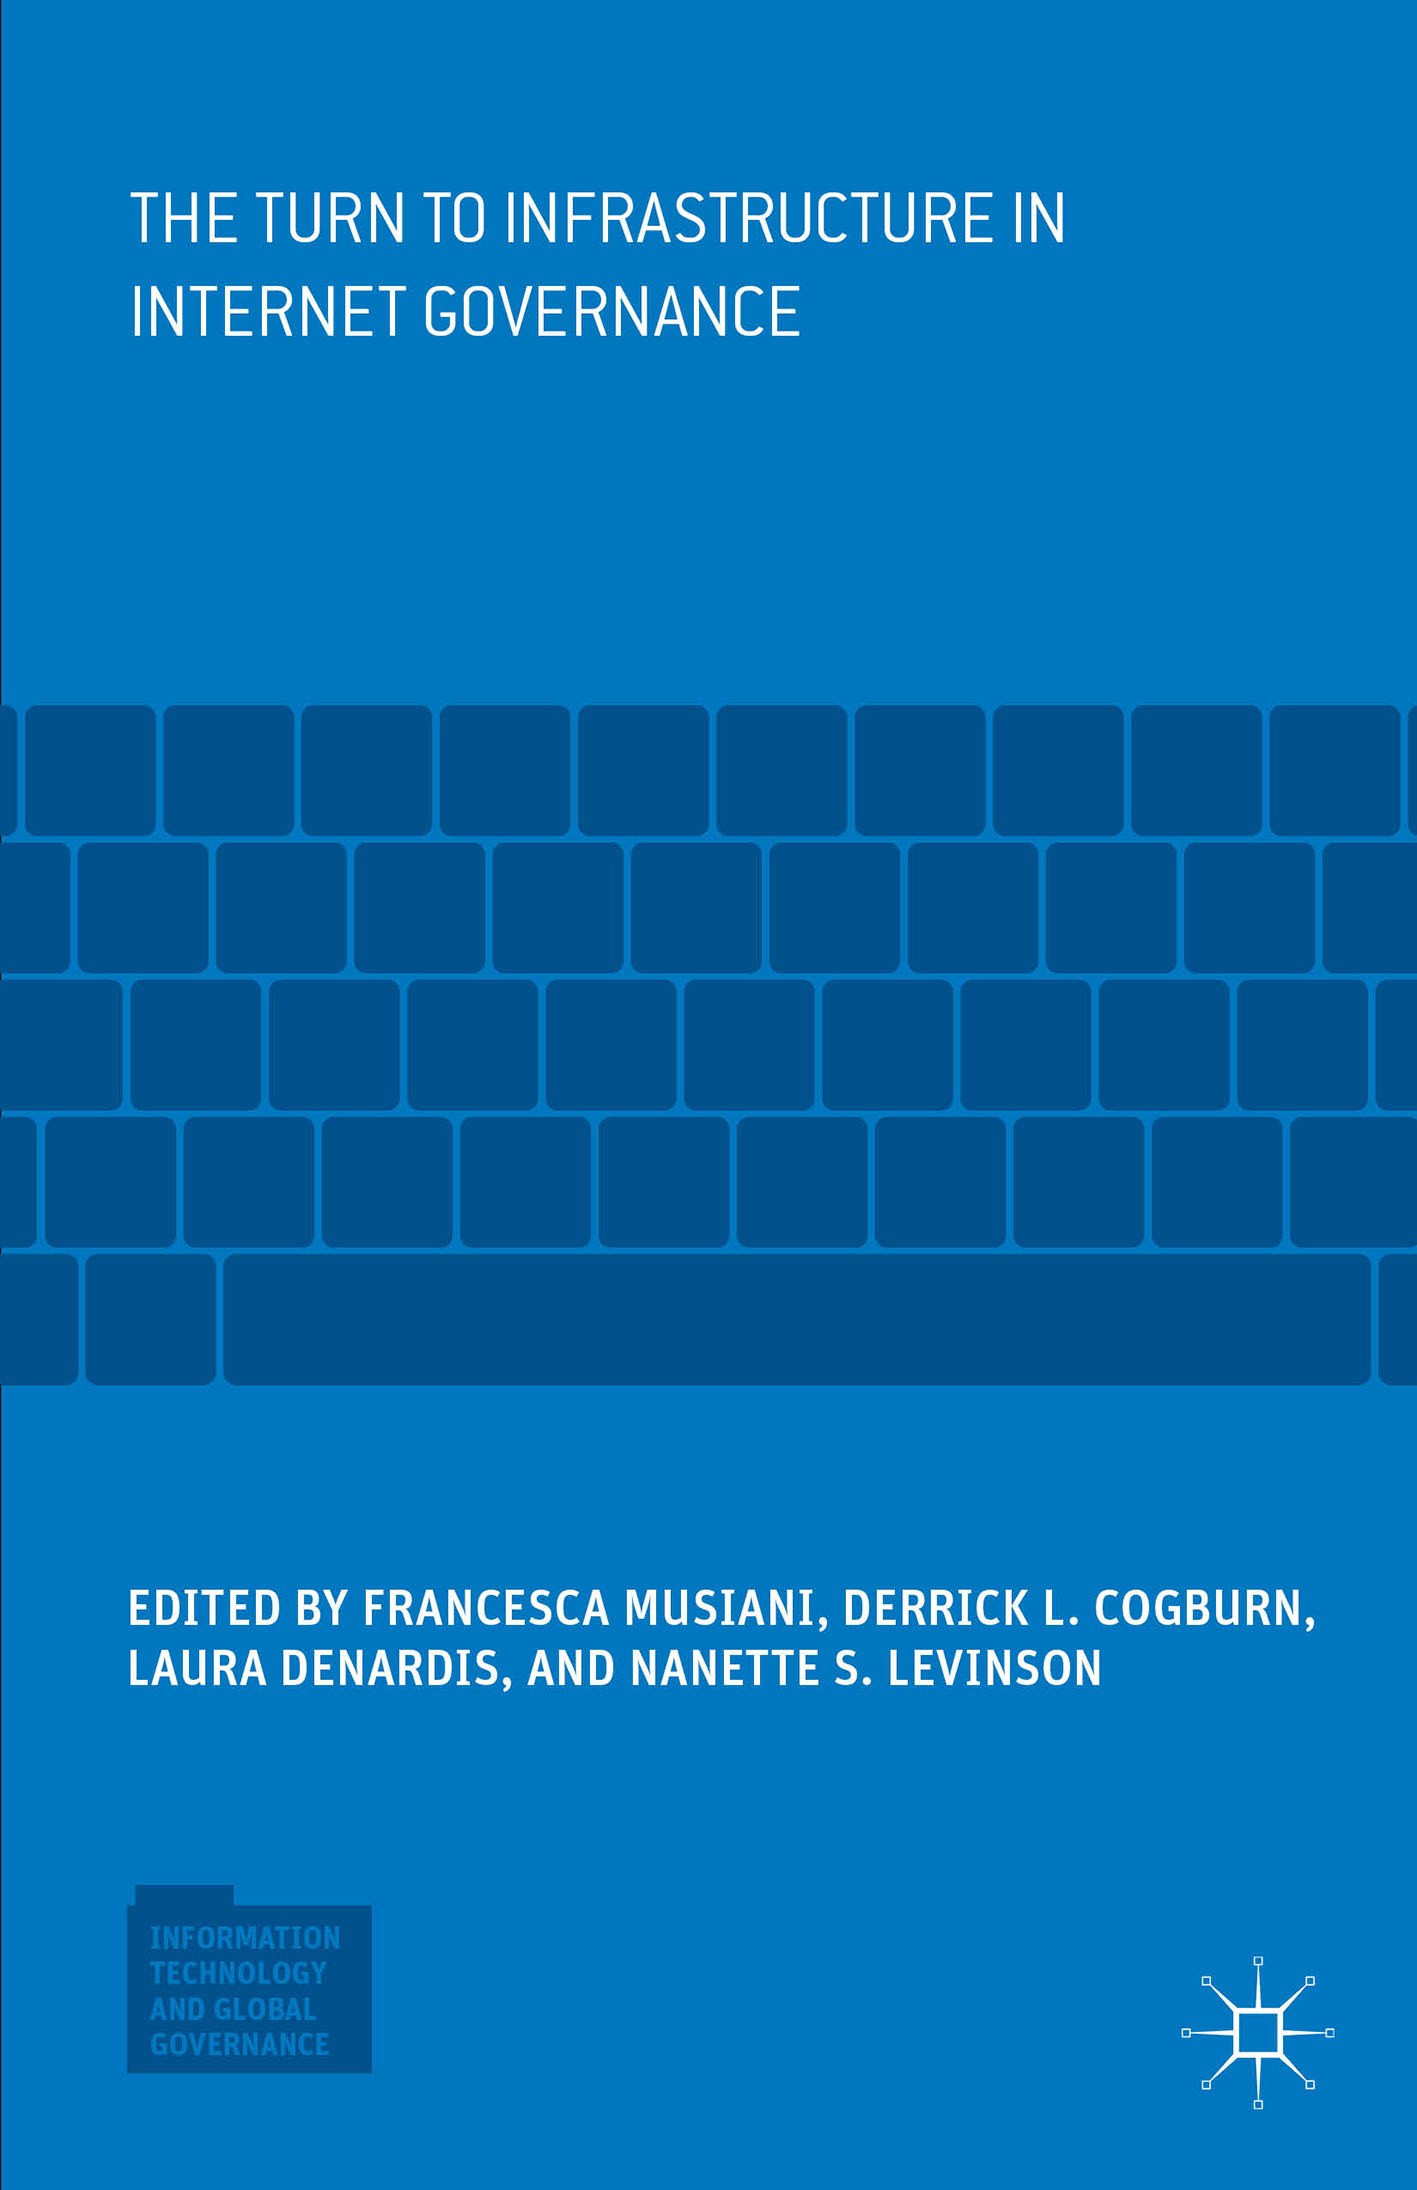 The Turn to Infrastructure in Internet Governance Book Cover.jpg